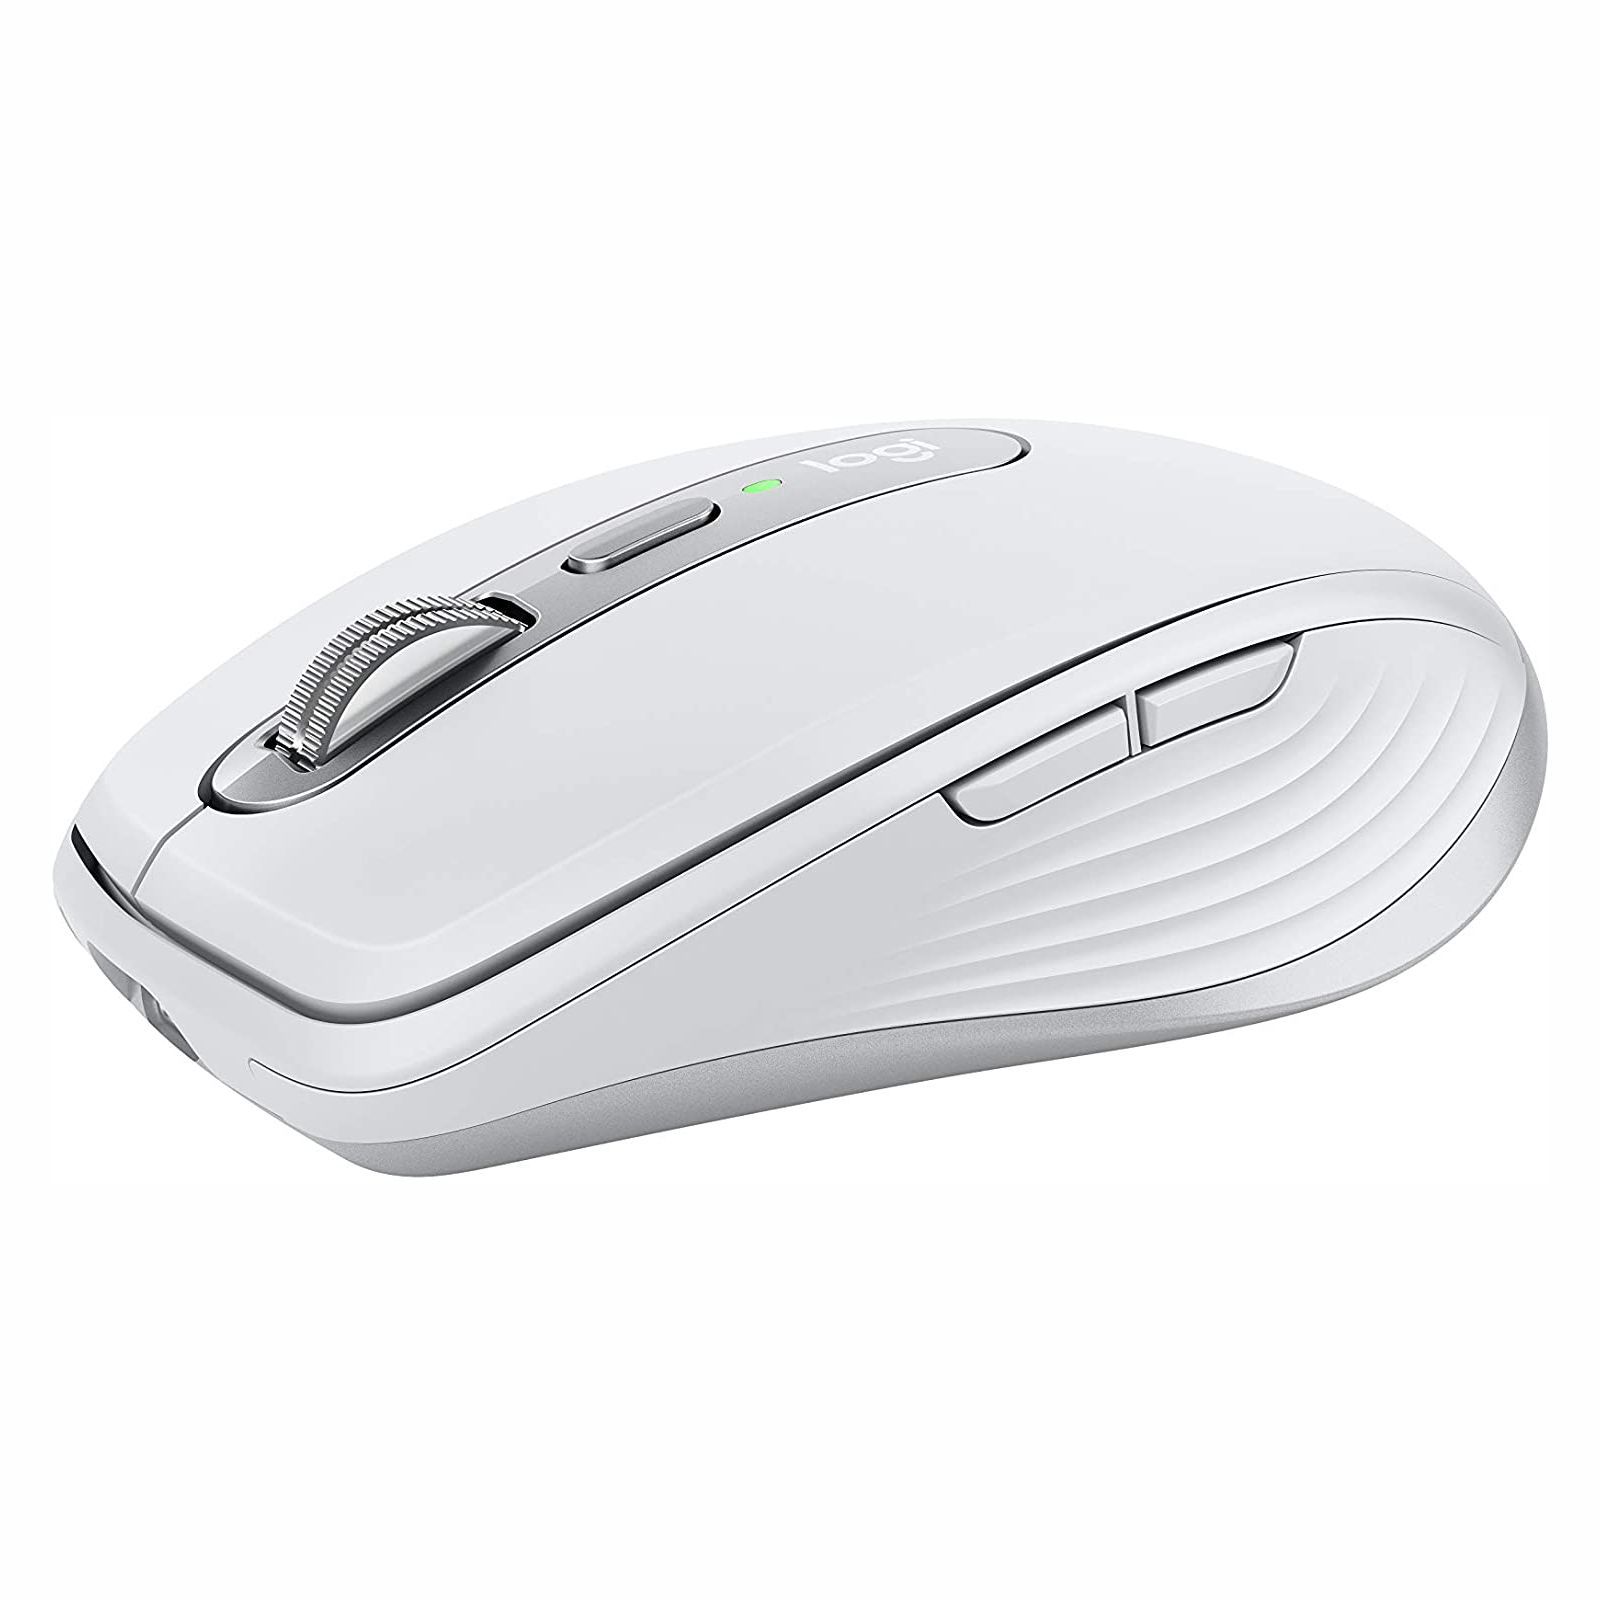  Chuột Vi Tính Không Dây 4000DPI Logitech MX Anywhere 3 for Mac Compact Performance Mouse,Wireless, Comfortable, Ultrafast Scrolling, Any Surface, Portable, 4000DPI, Customizable Buttons, USB-C 